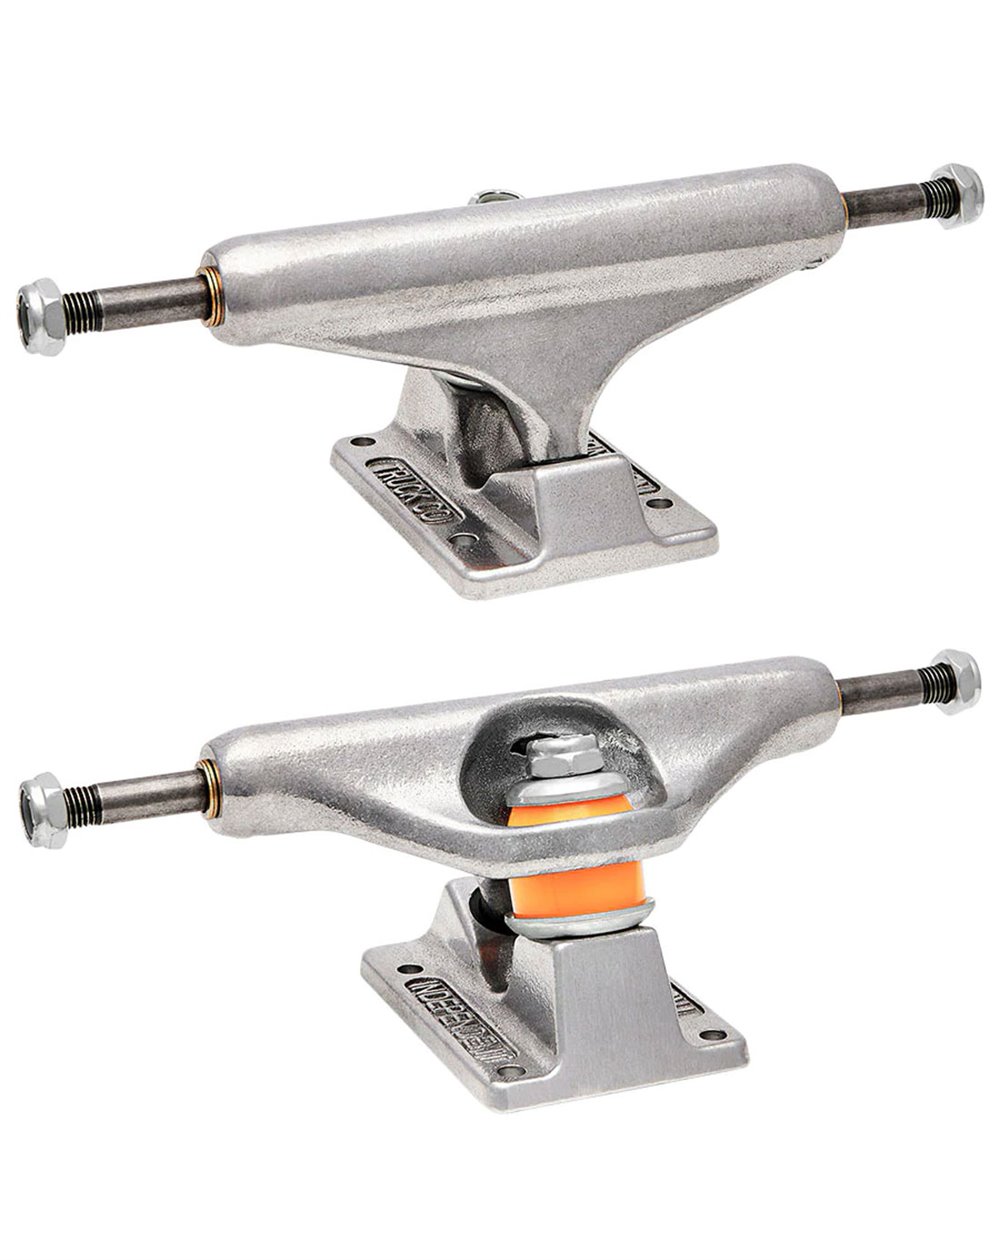 Independent Stage XI Hollow 149mm Skateboard Trucks pack of 2